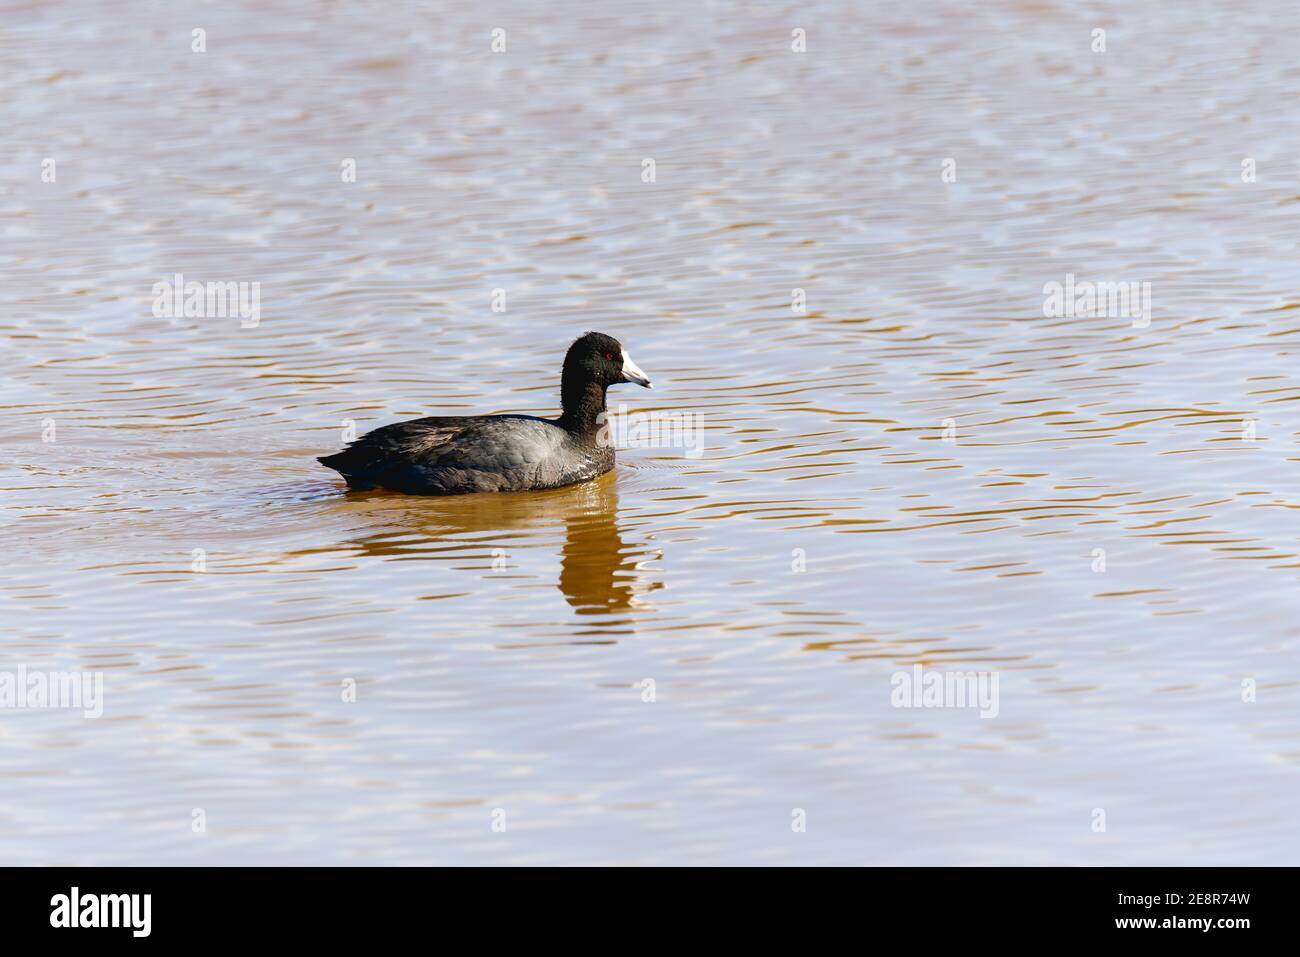 American coot, also known as a mud hen or pouldeau, floating on water. Oso Flaco Lake sunset, California Stock Photo